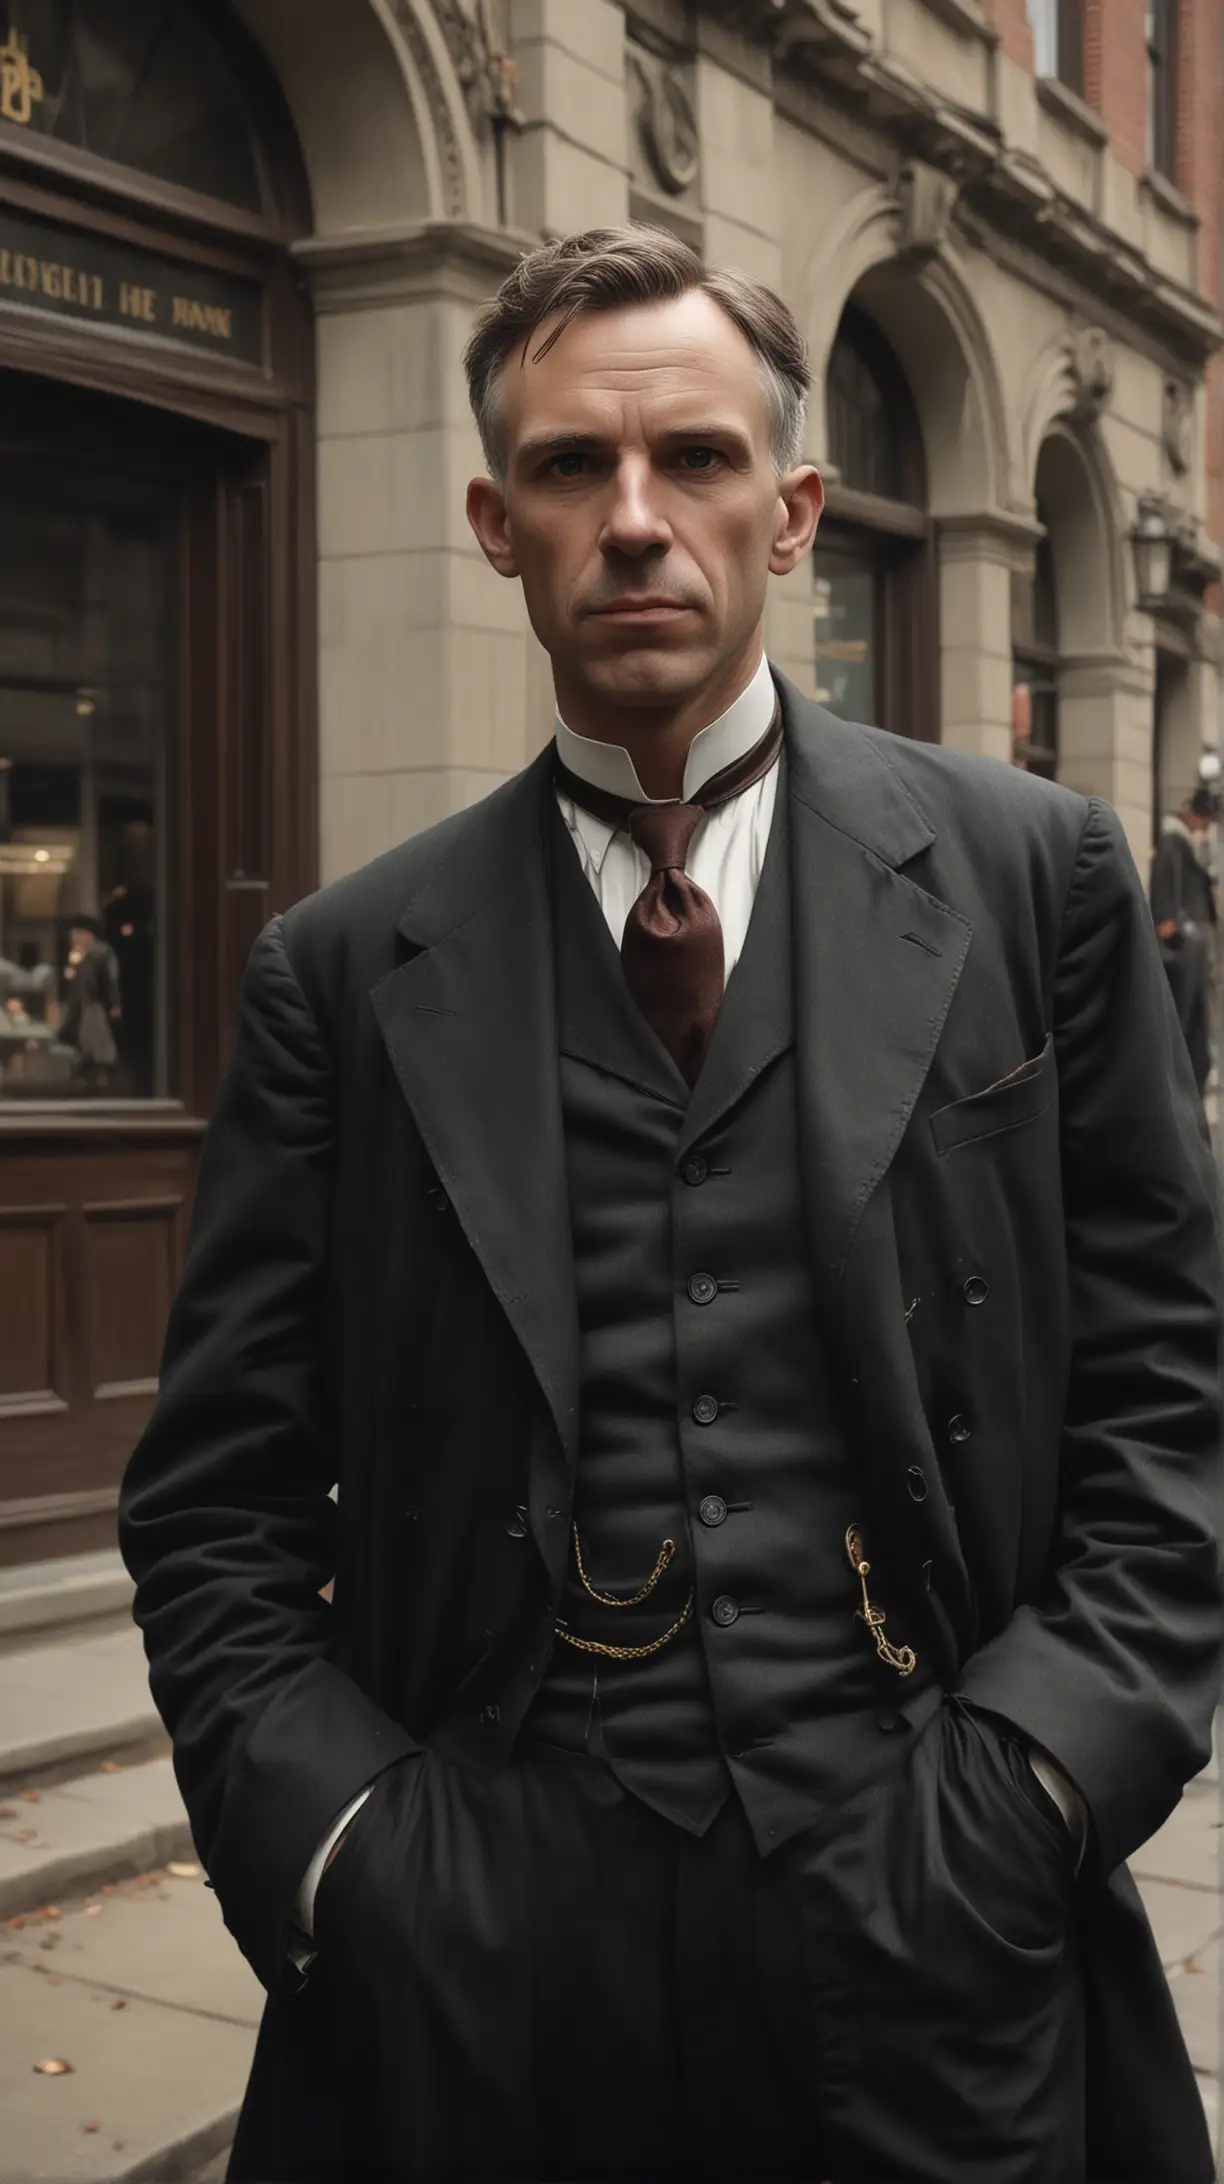 Cinematic and dramatic, realistic portrait.  
Era: 1896
Standing outside the bank, 
Scene: Henry Ford